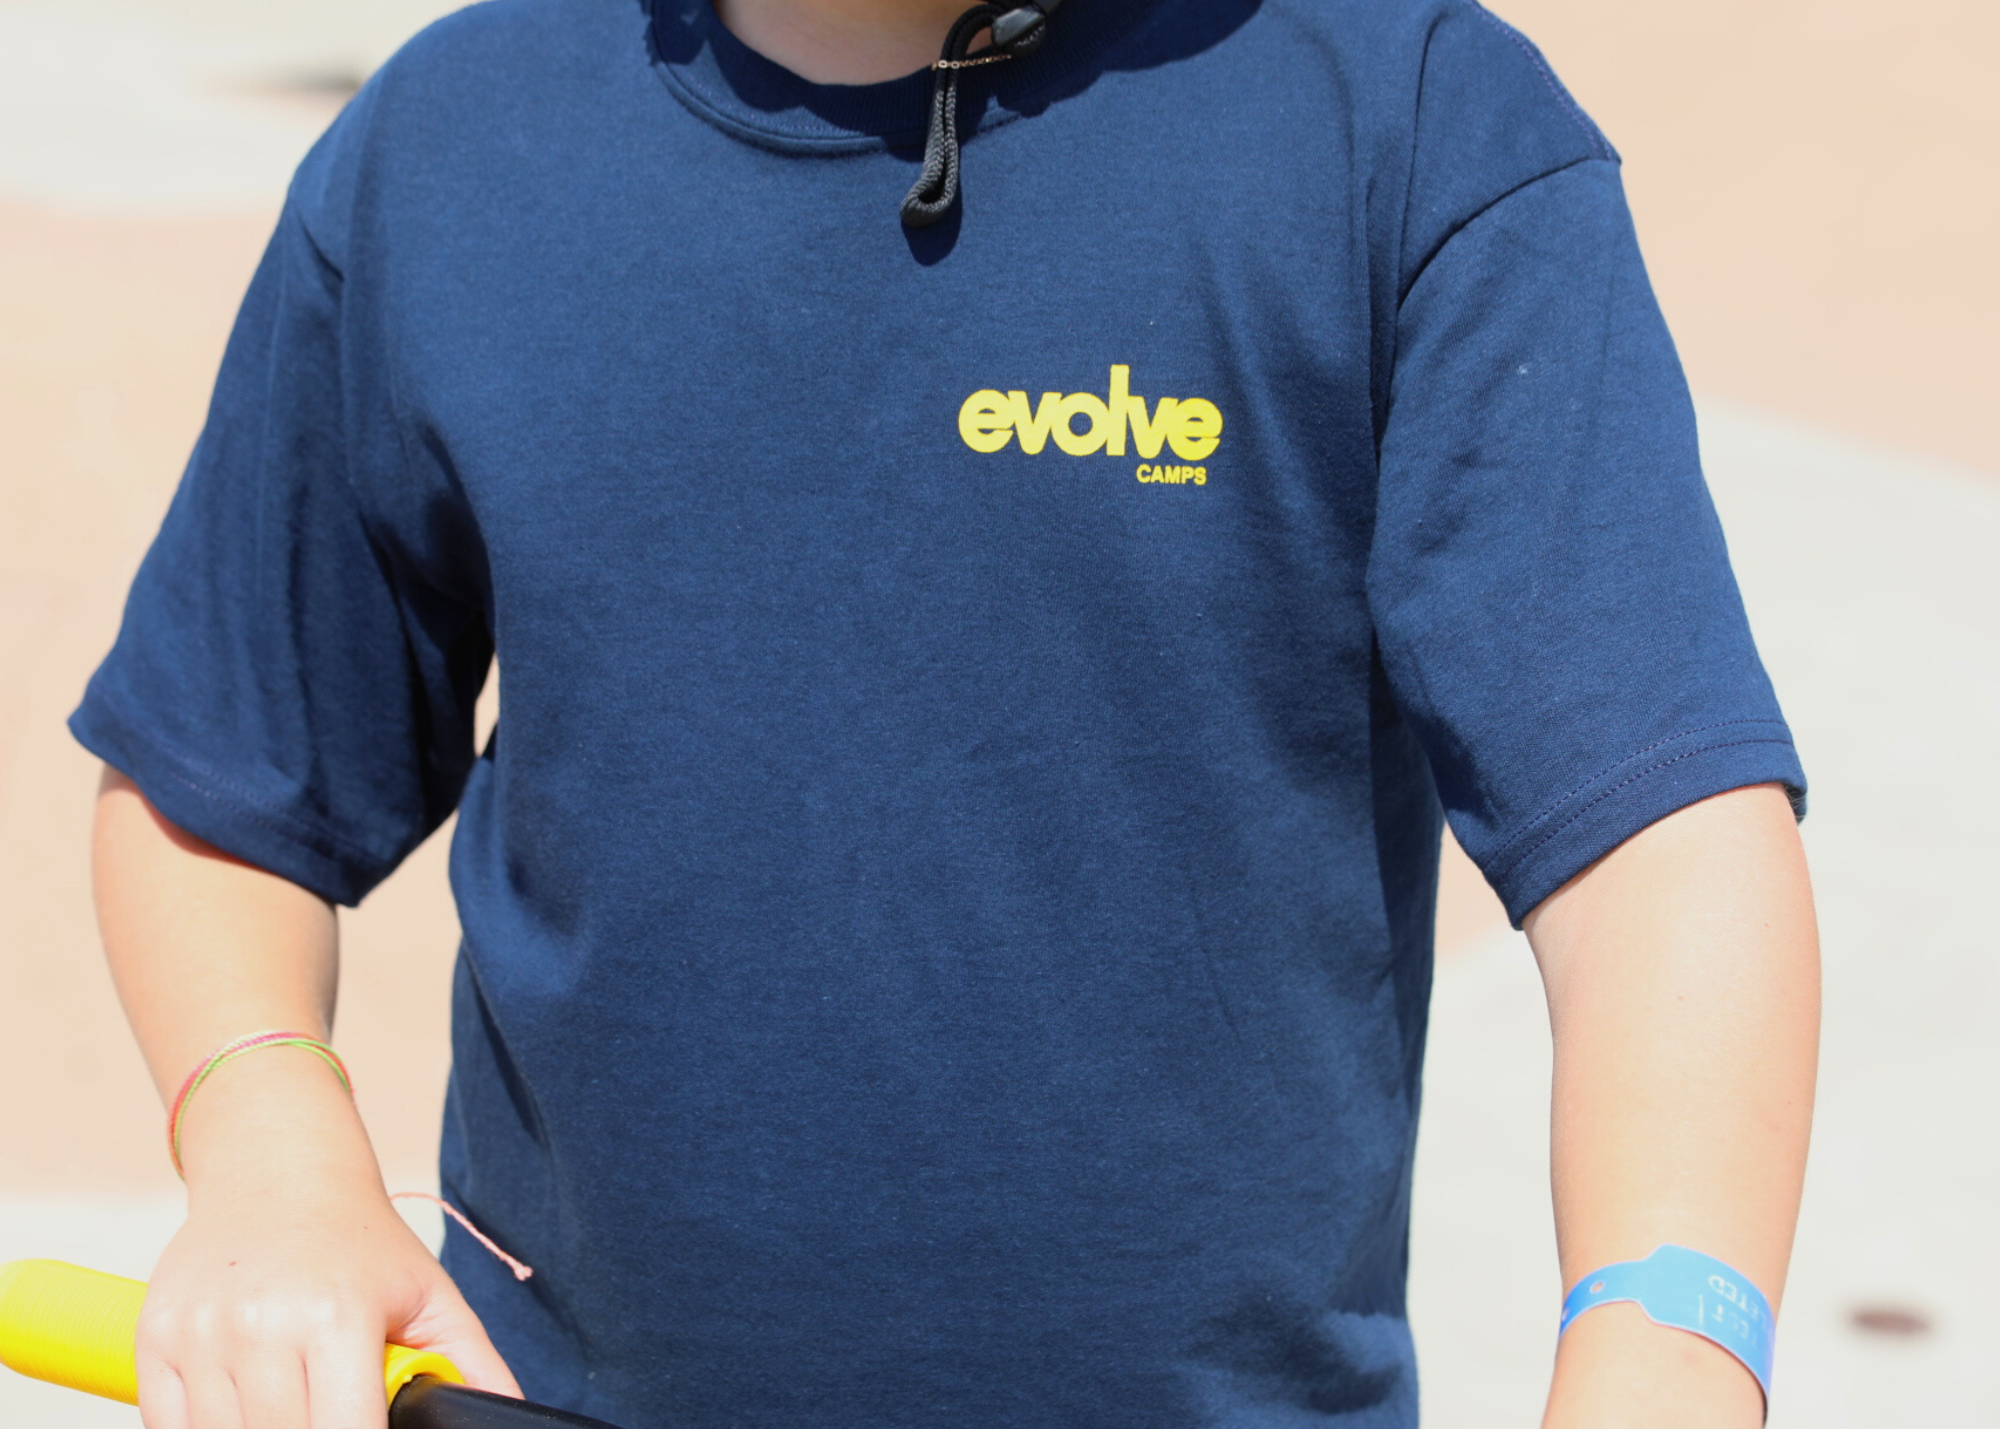 Evolve Camps 2022 t-shirts